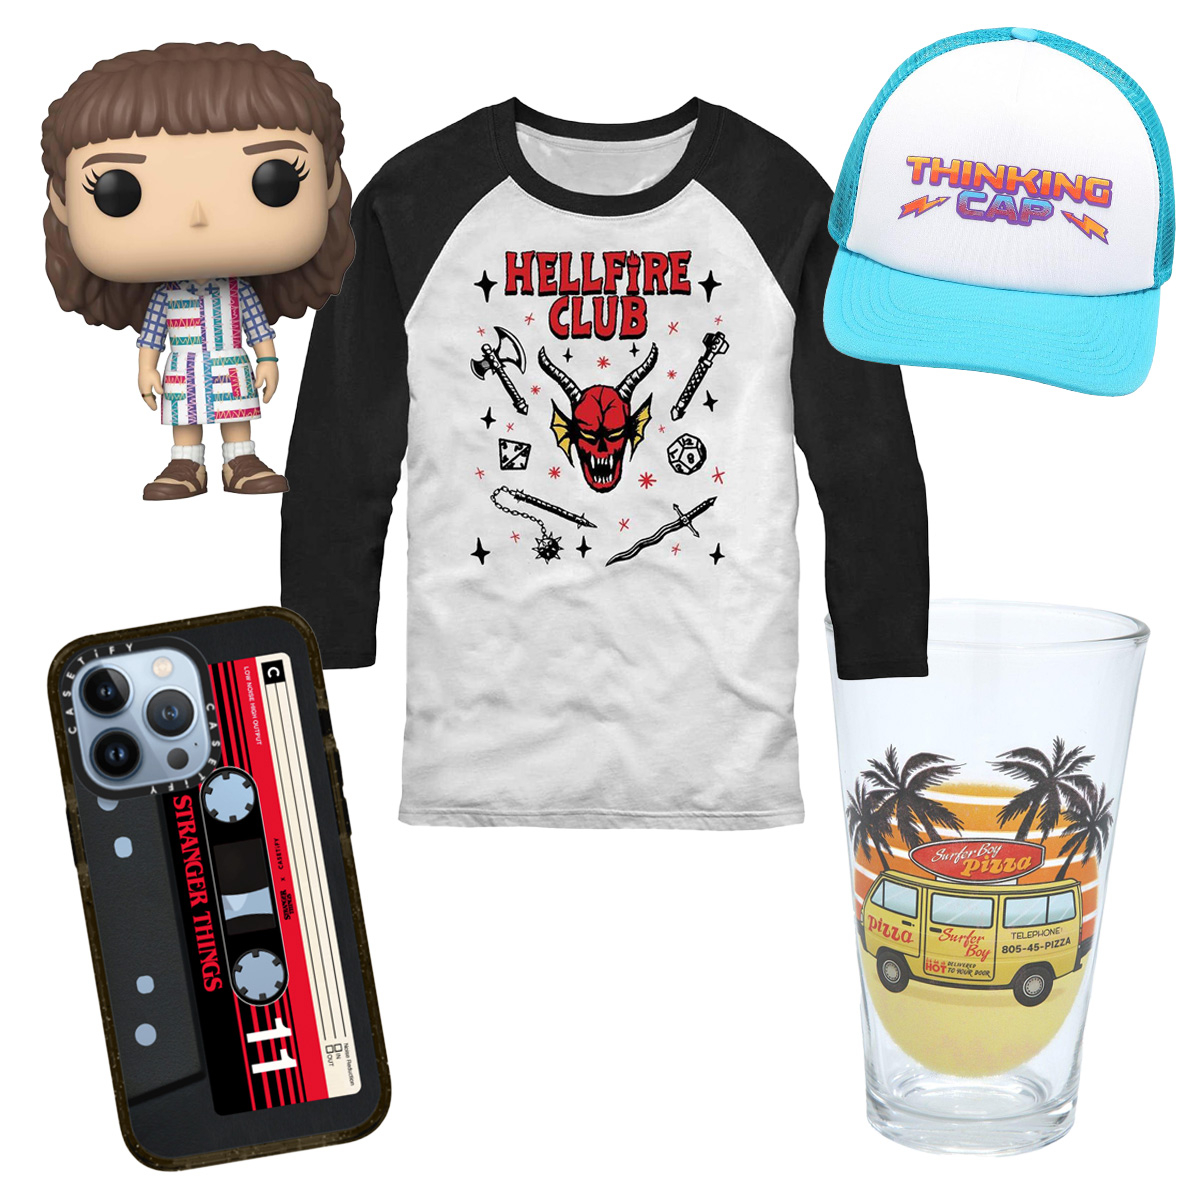 A Guide to All the Stranger Things 3 Merch and Promotions